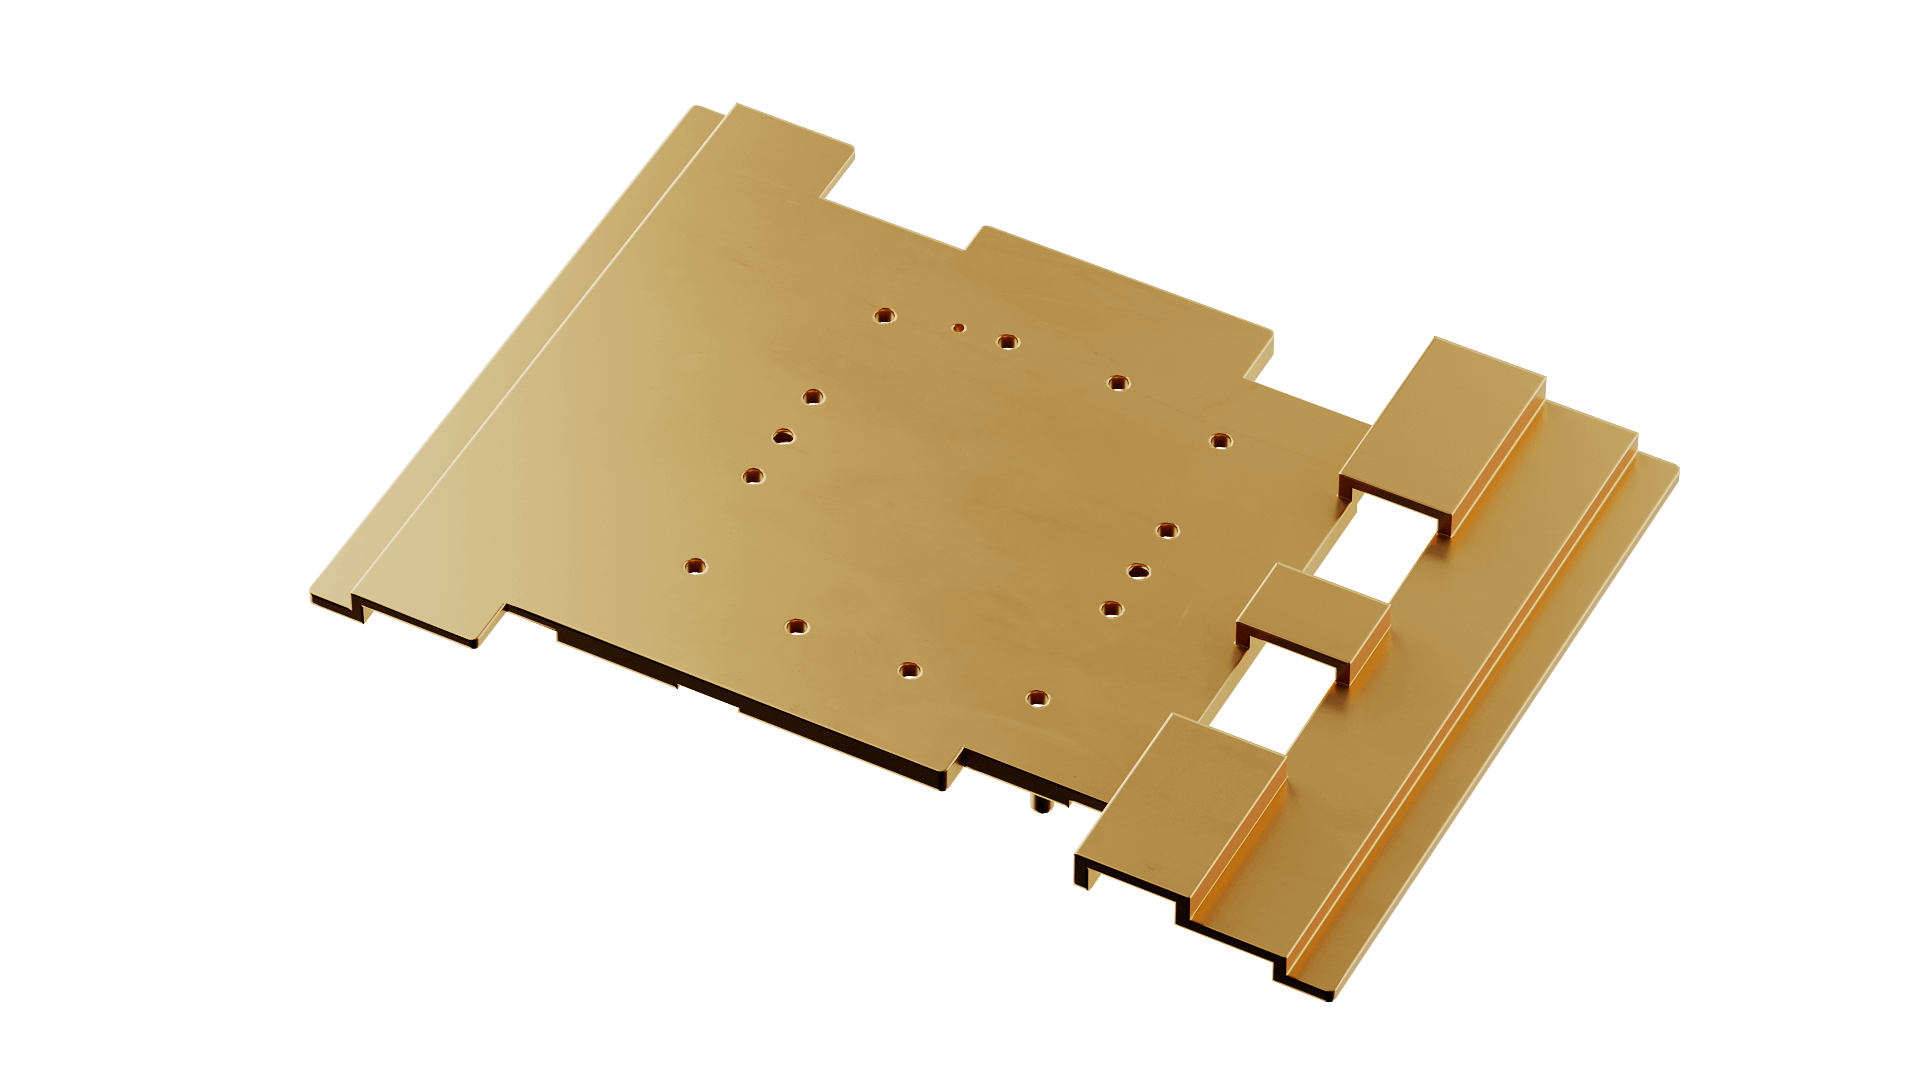 Full-coverage coldplate on PCB